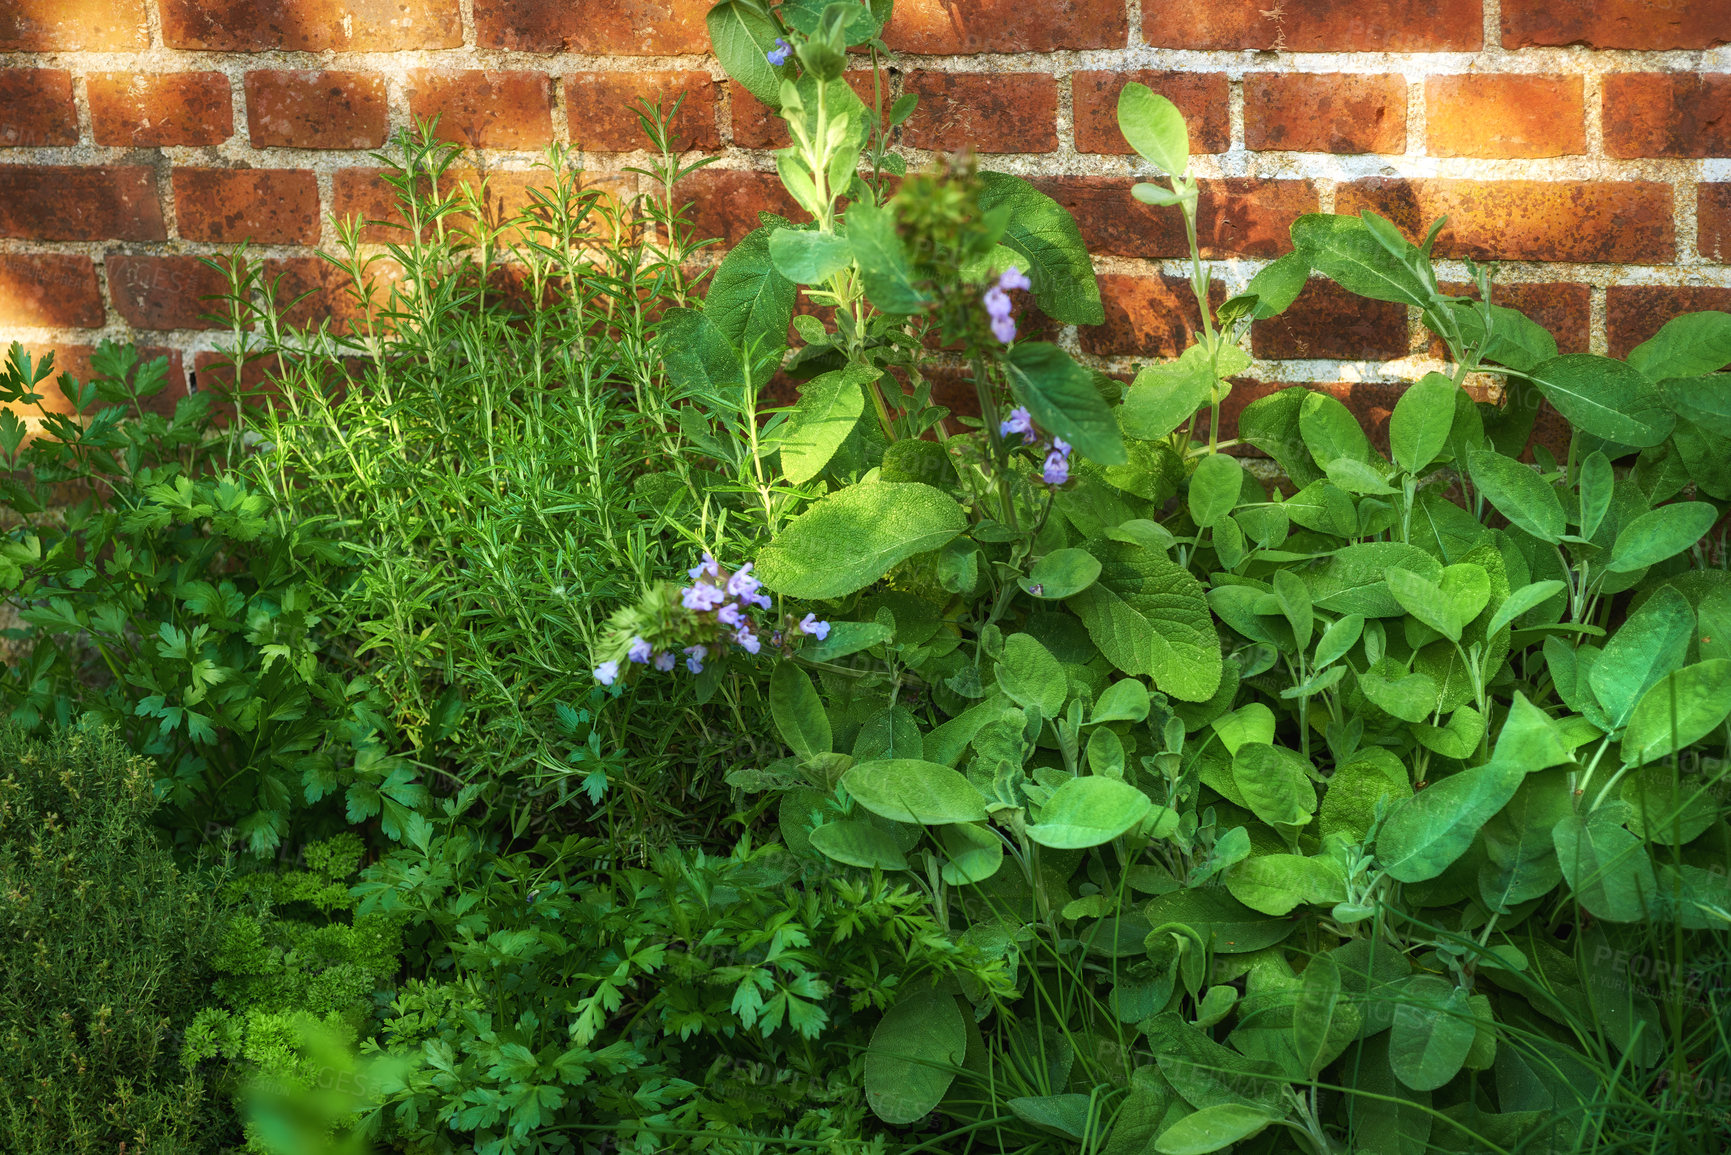 Buy stock photo Overgrown wild herb garden against the wall of a red brick house. Various plants in a lush flowerbed. Different green shrubs growing in a backyard. Vibrant nature scene of parsley, sage and rosemary.